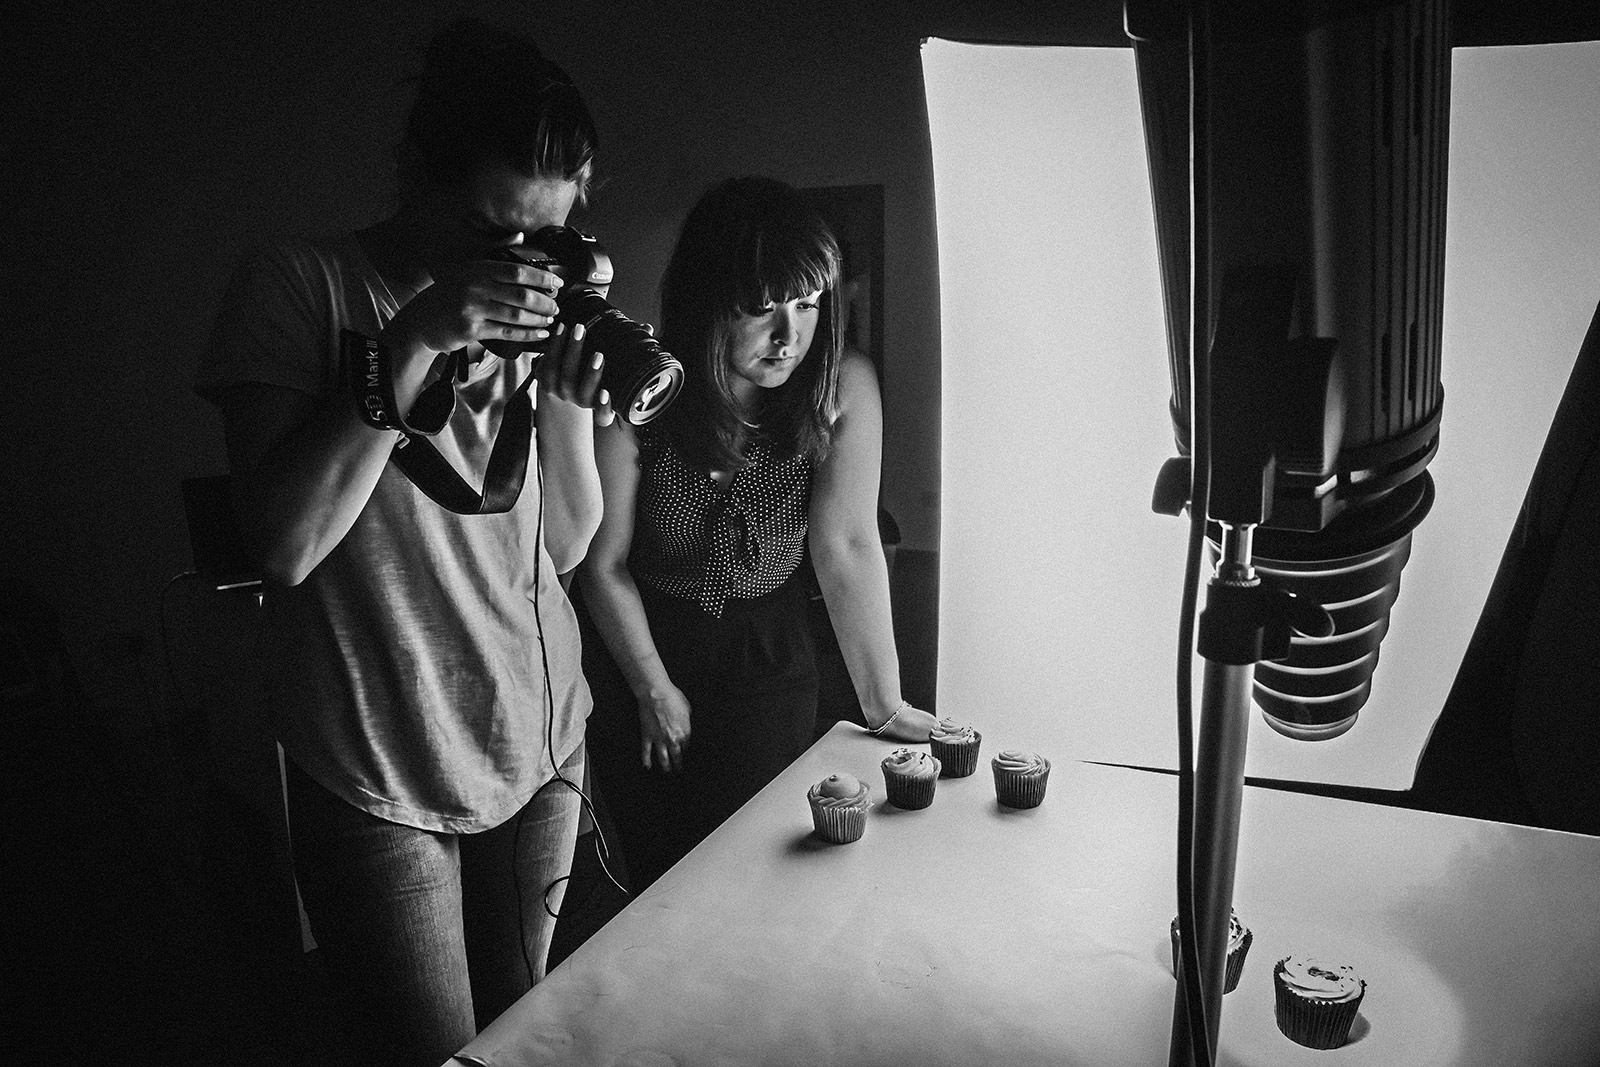 Interns Agata and Charly experimenting in the Absolute photography studio